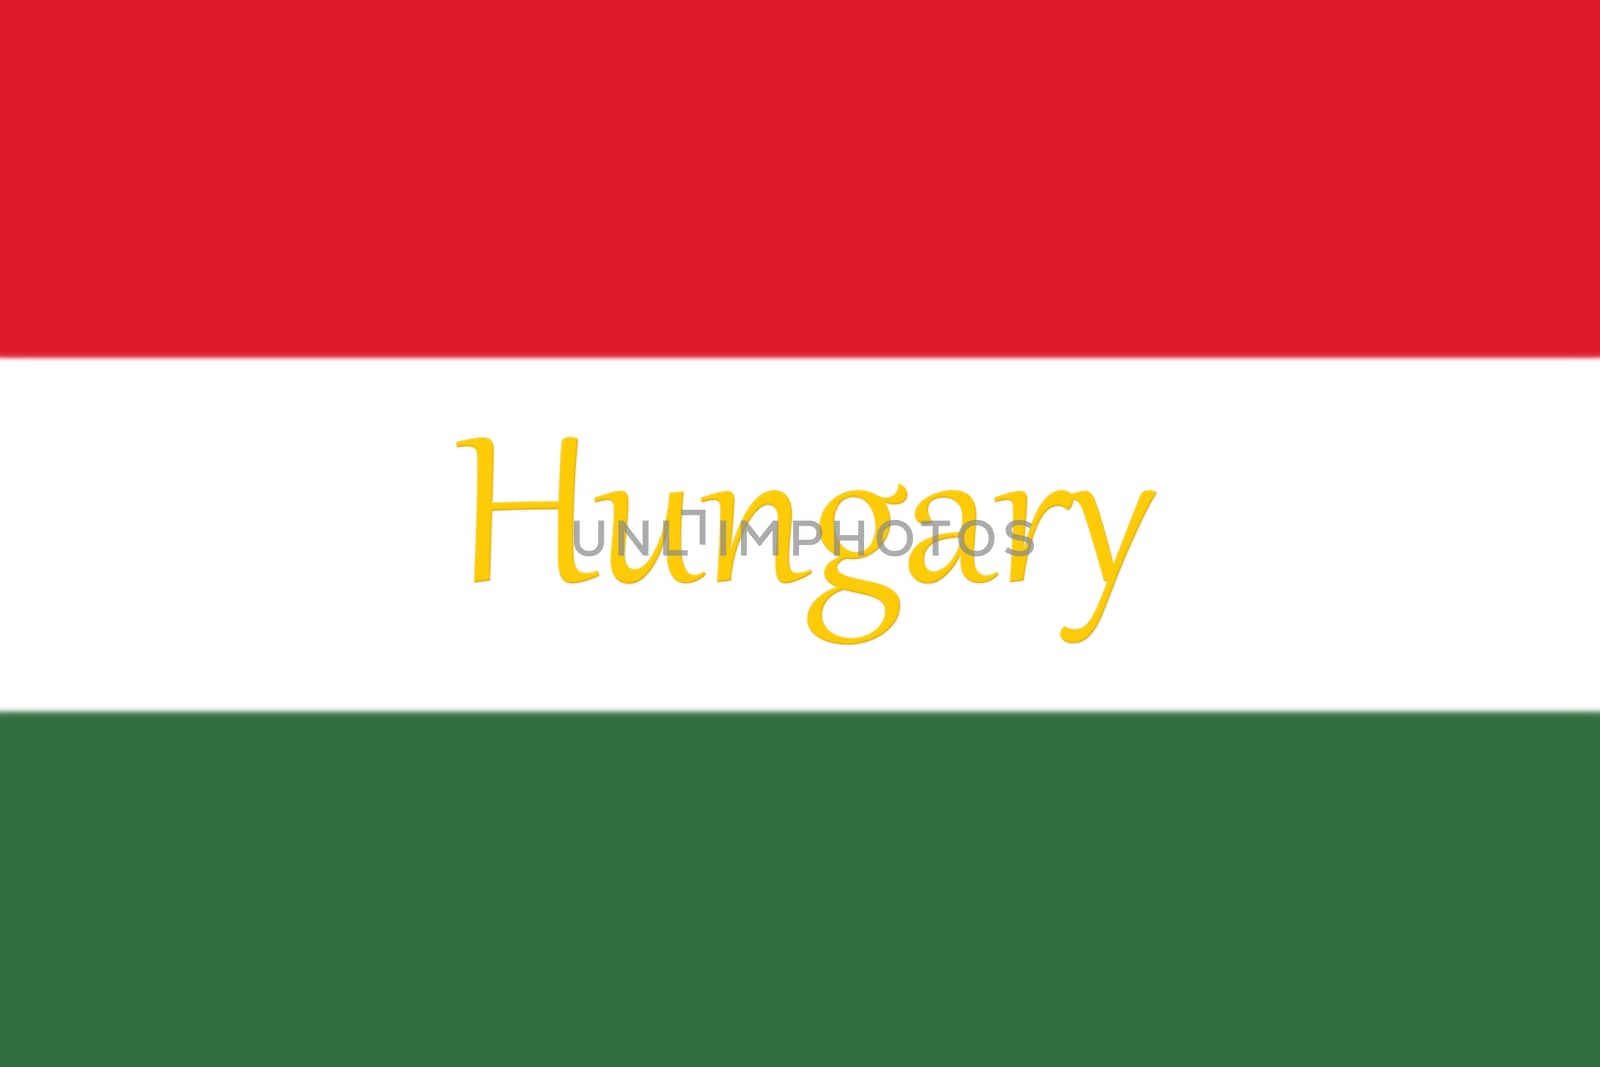 Hungarian National Flag With Hungary Written On It 3D illustration 